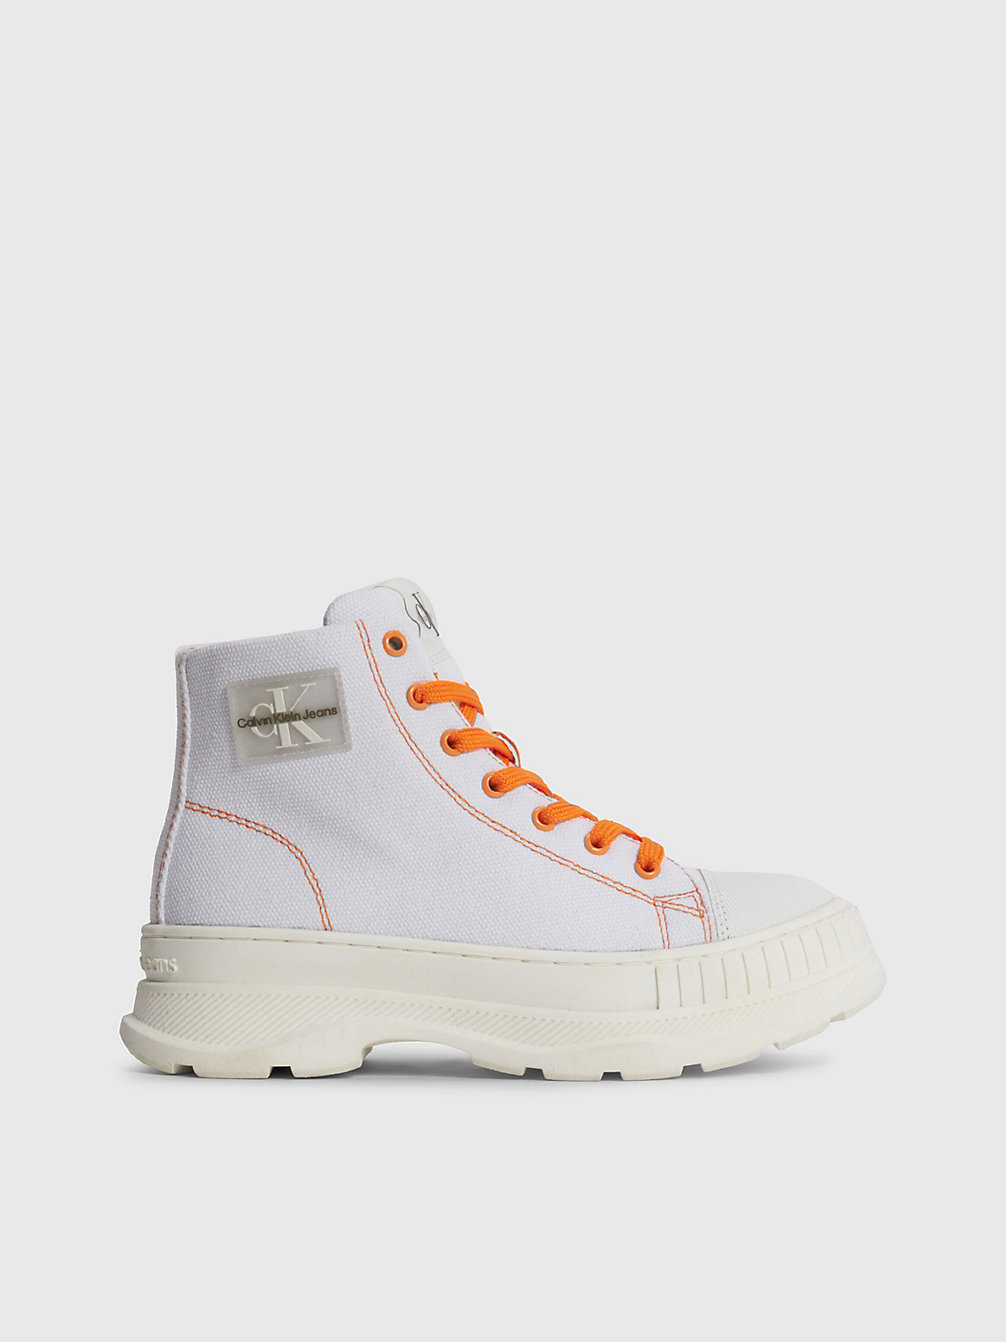 WHITE Kids Recycled Canvas Boots undefined kids unisex Calvin Klein